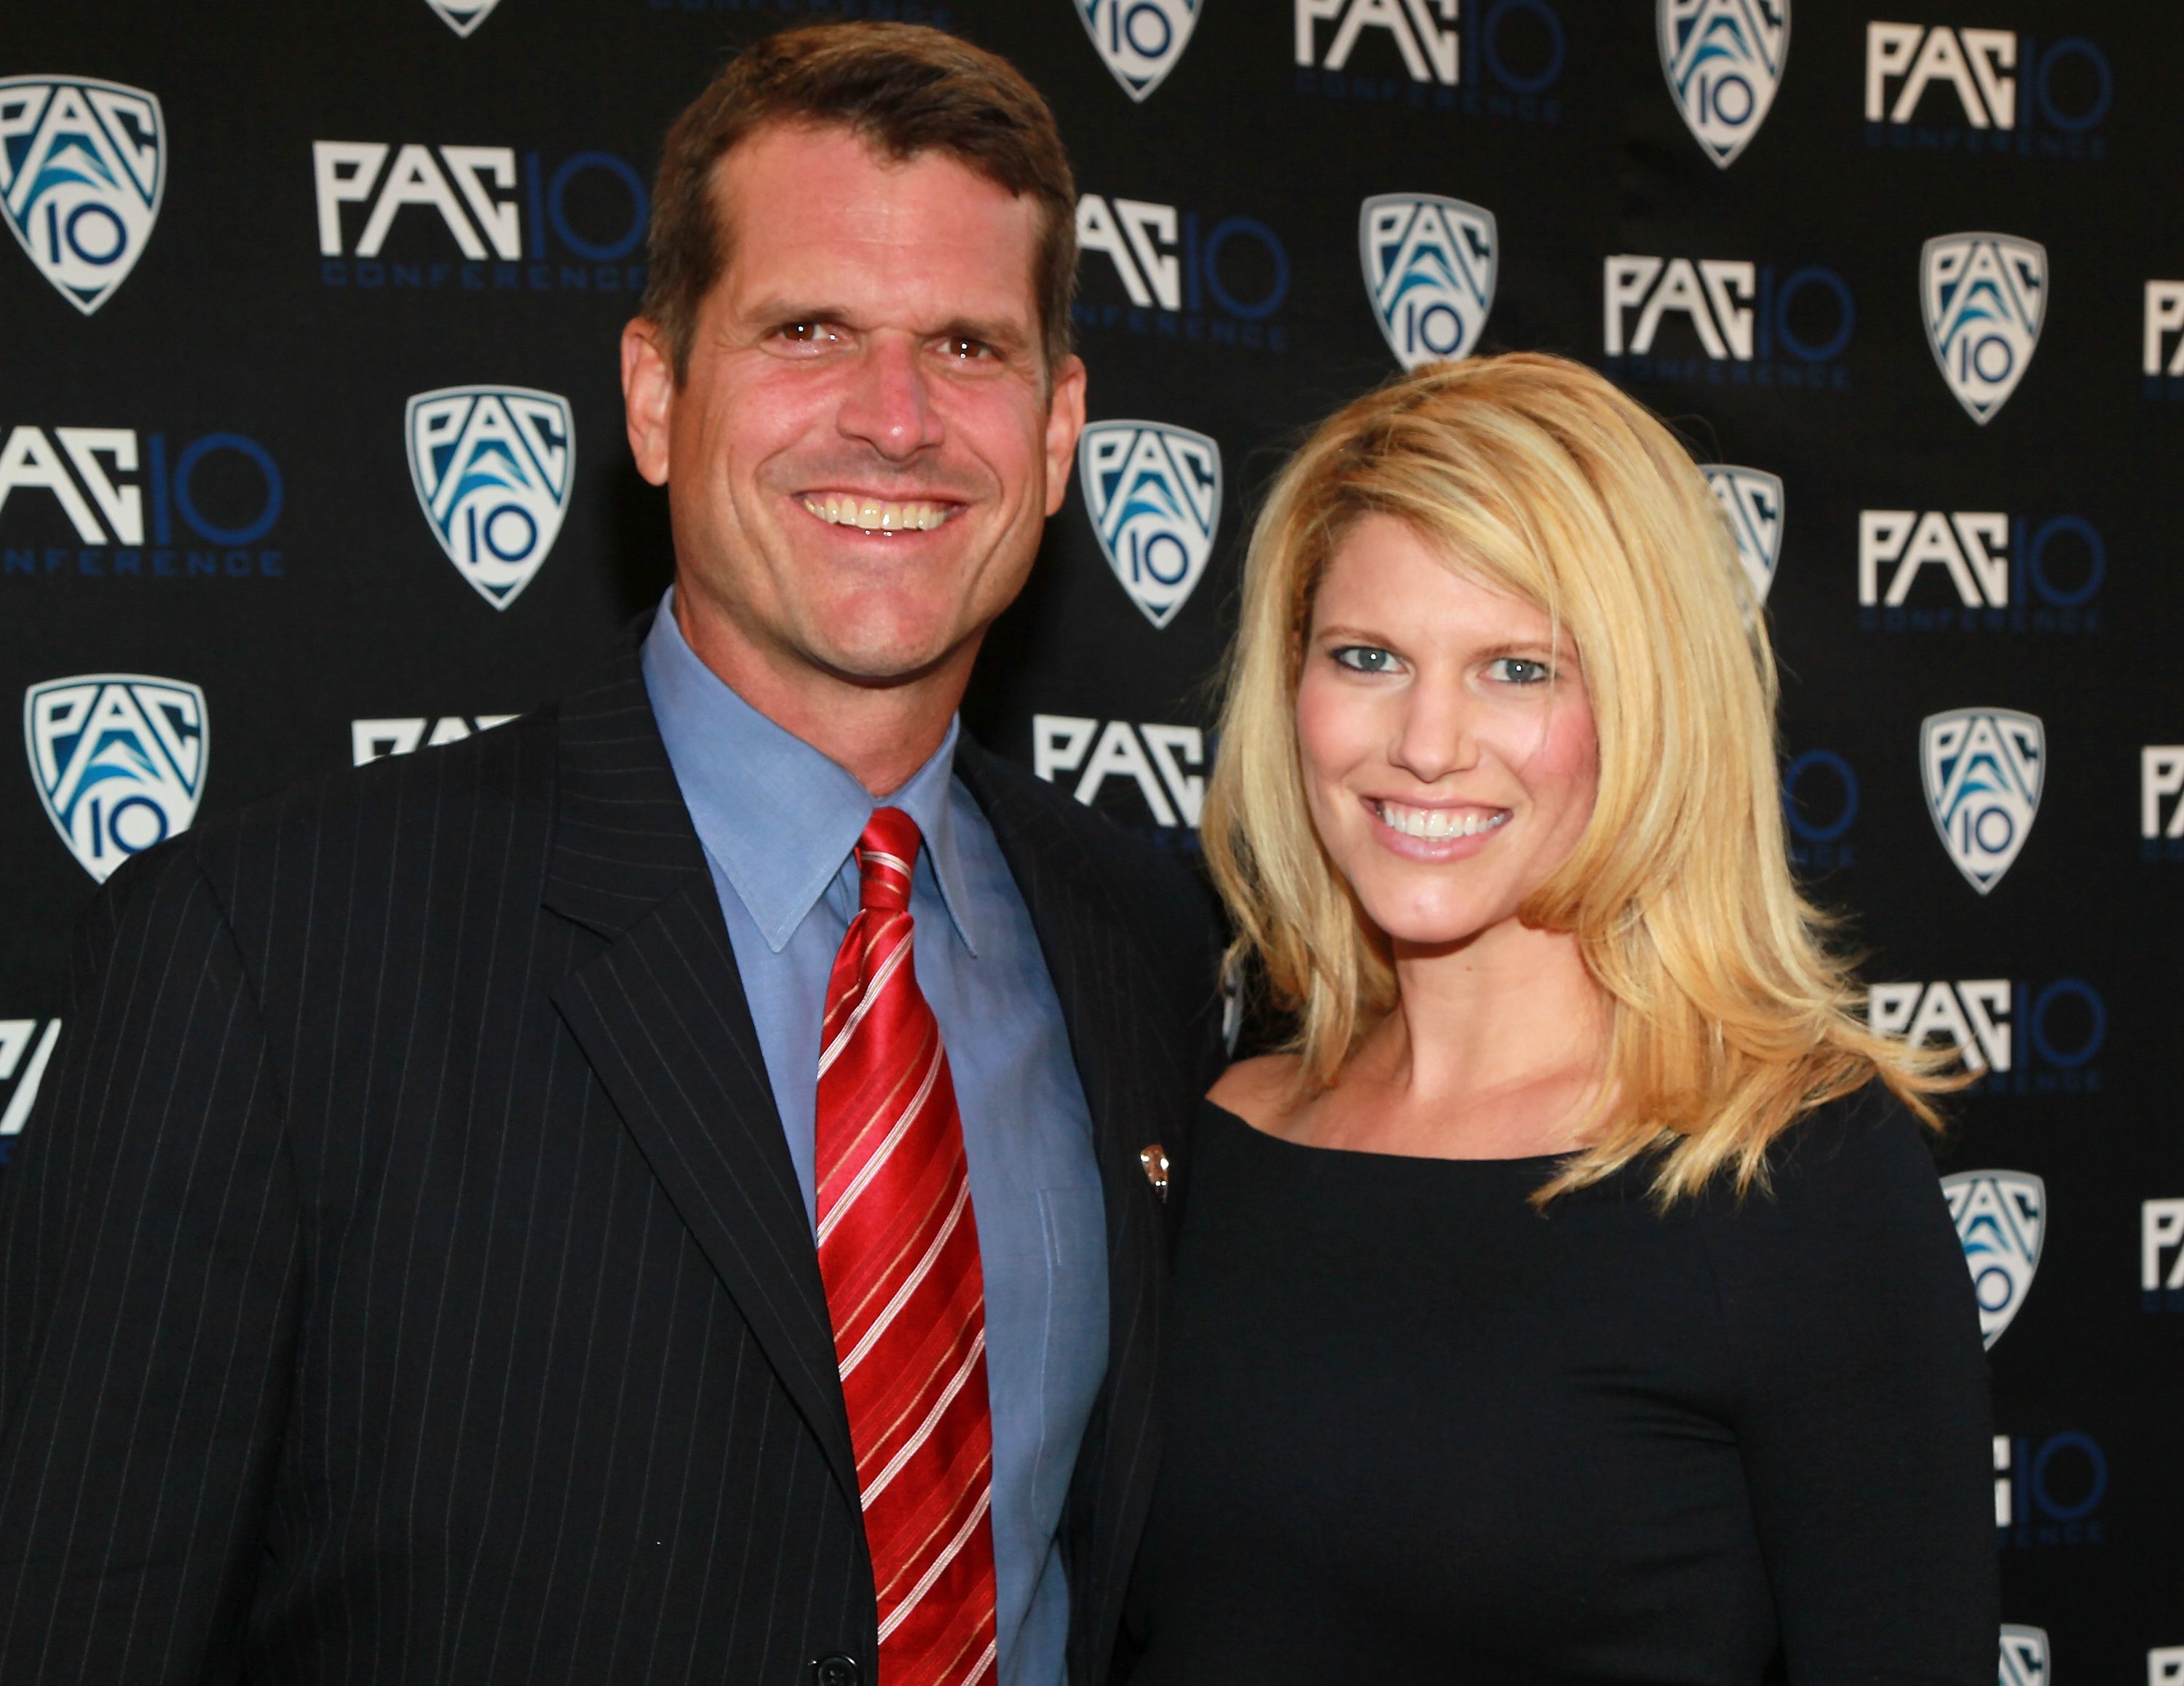 Jim Harbaugh and Sarah Harbaugh during FOX Sports/PAC-10 Conference Hollywood premiere night at 20th Century FOX Studios on July 29, 2010, in Los Angeles, California. | Source: Getty Images